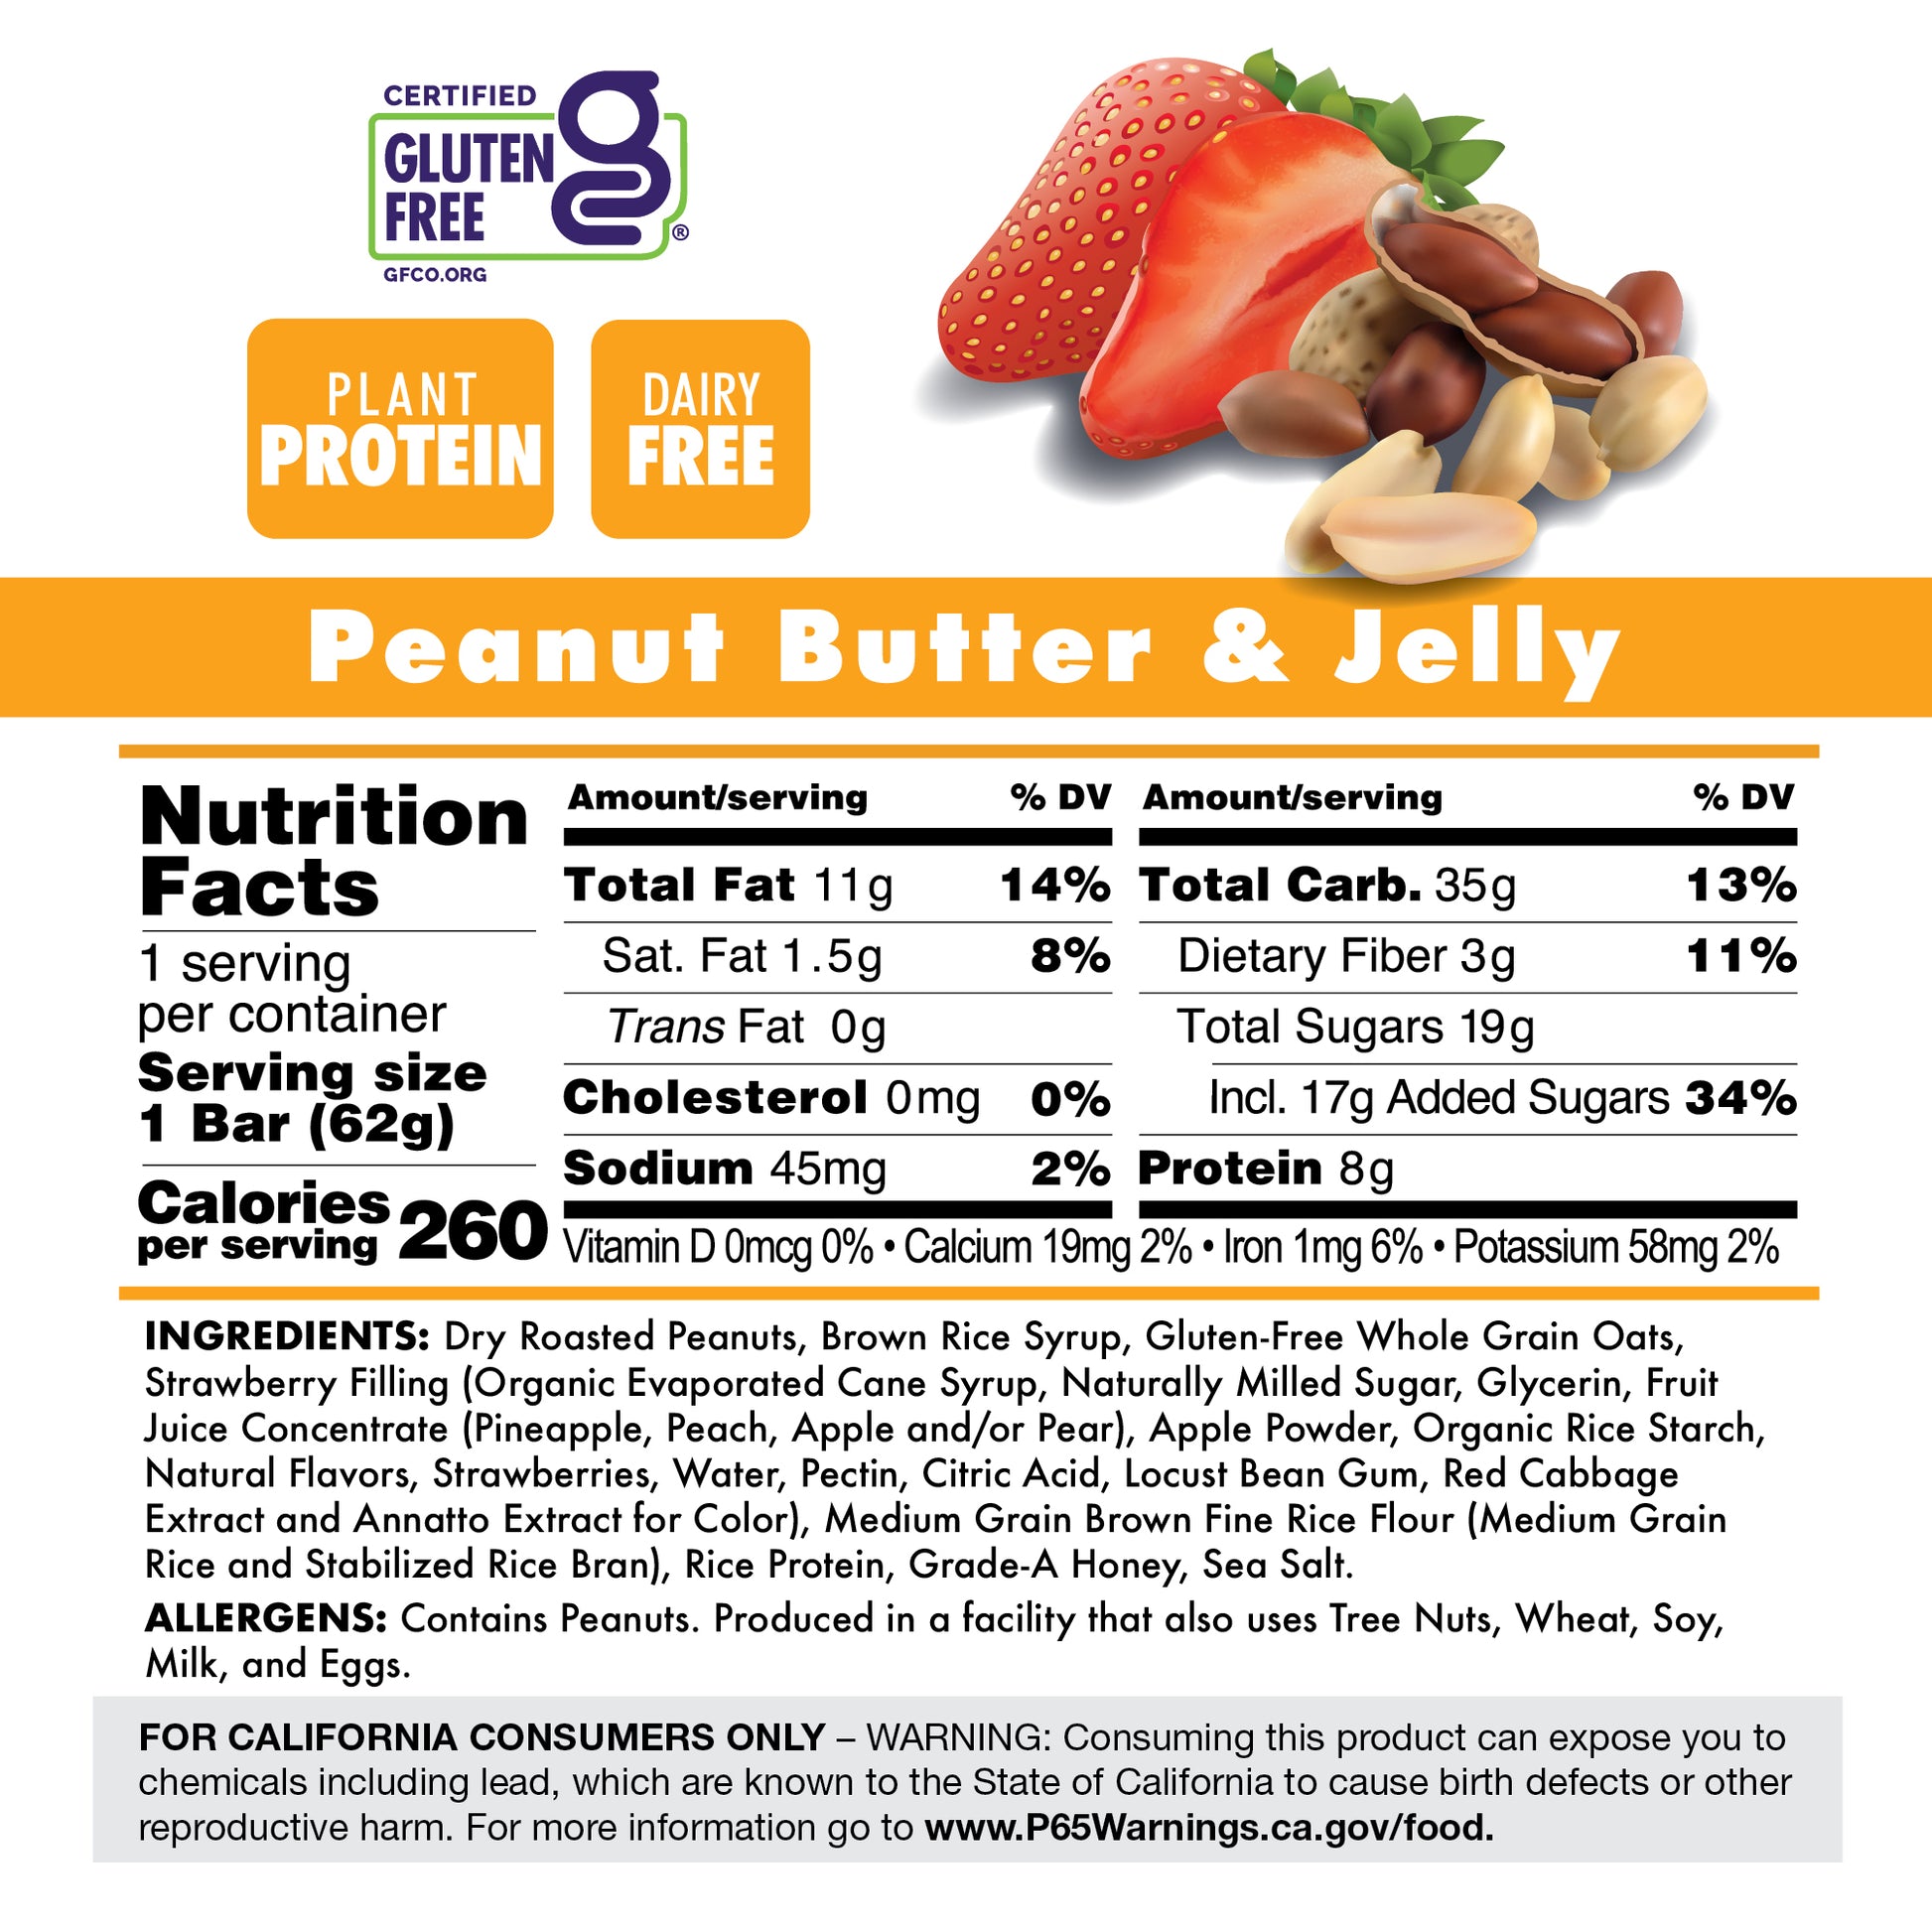 Peanut Butter & Jelly Energy Bar Nutrition Facts